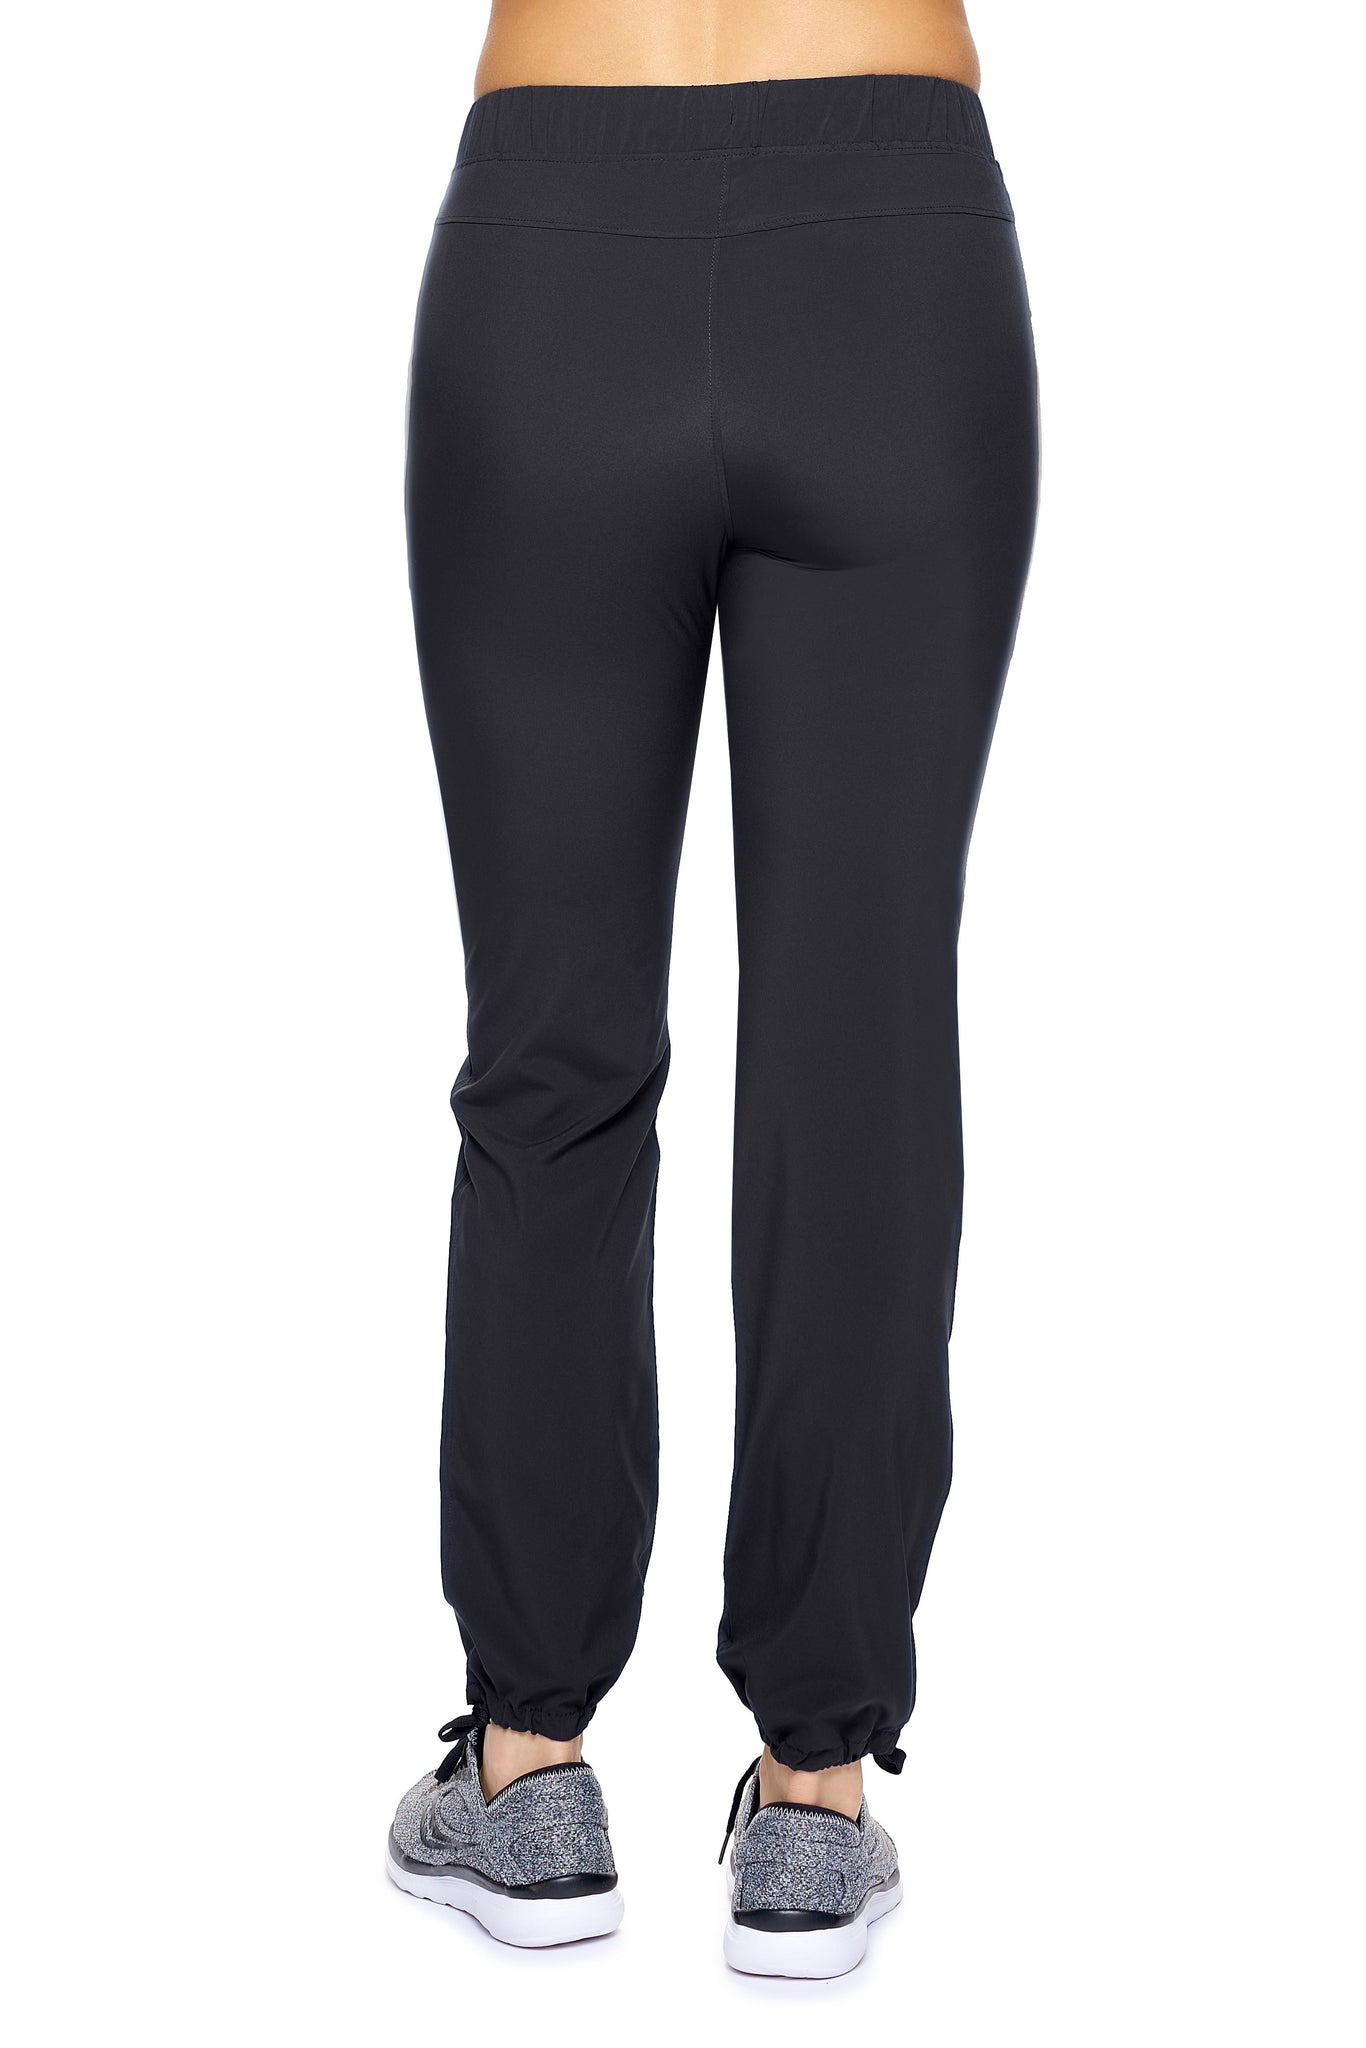 Expert Brand Wholesale Women's Gym Joggers in Black Image 2#black